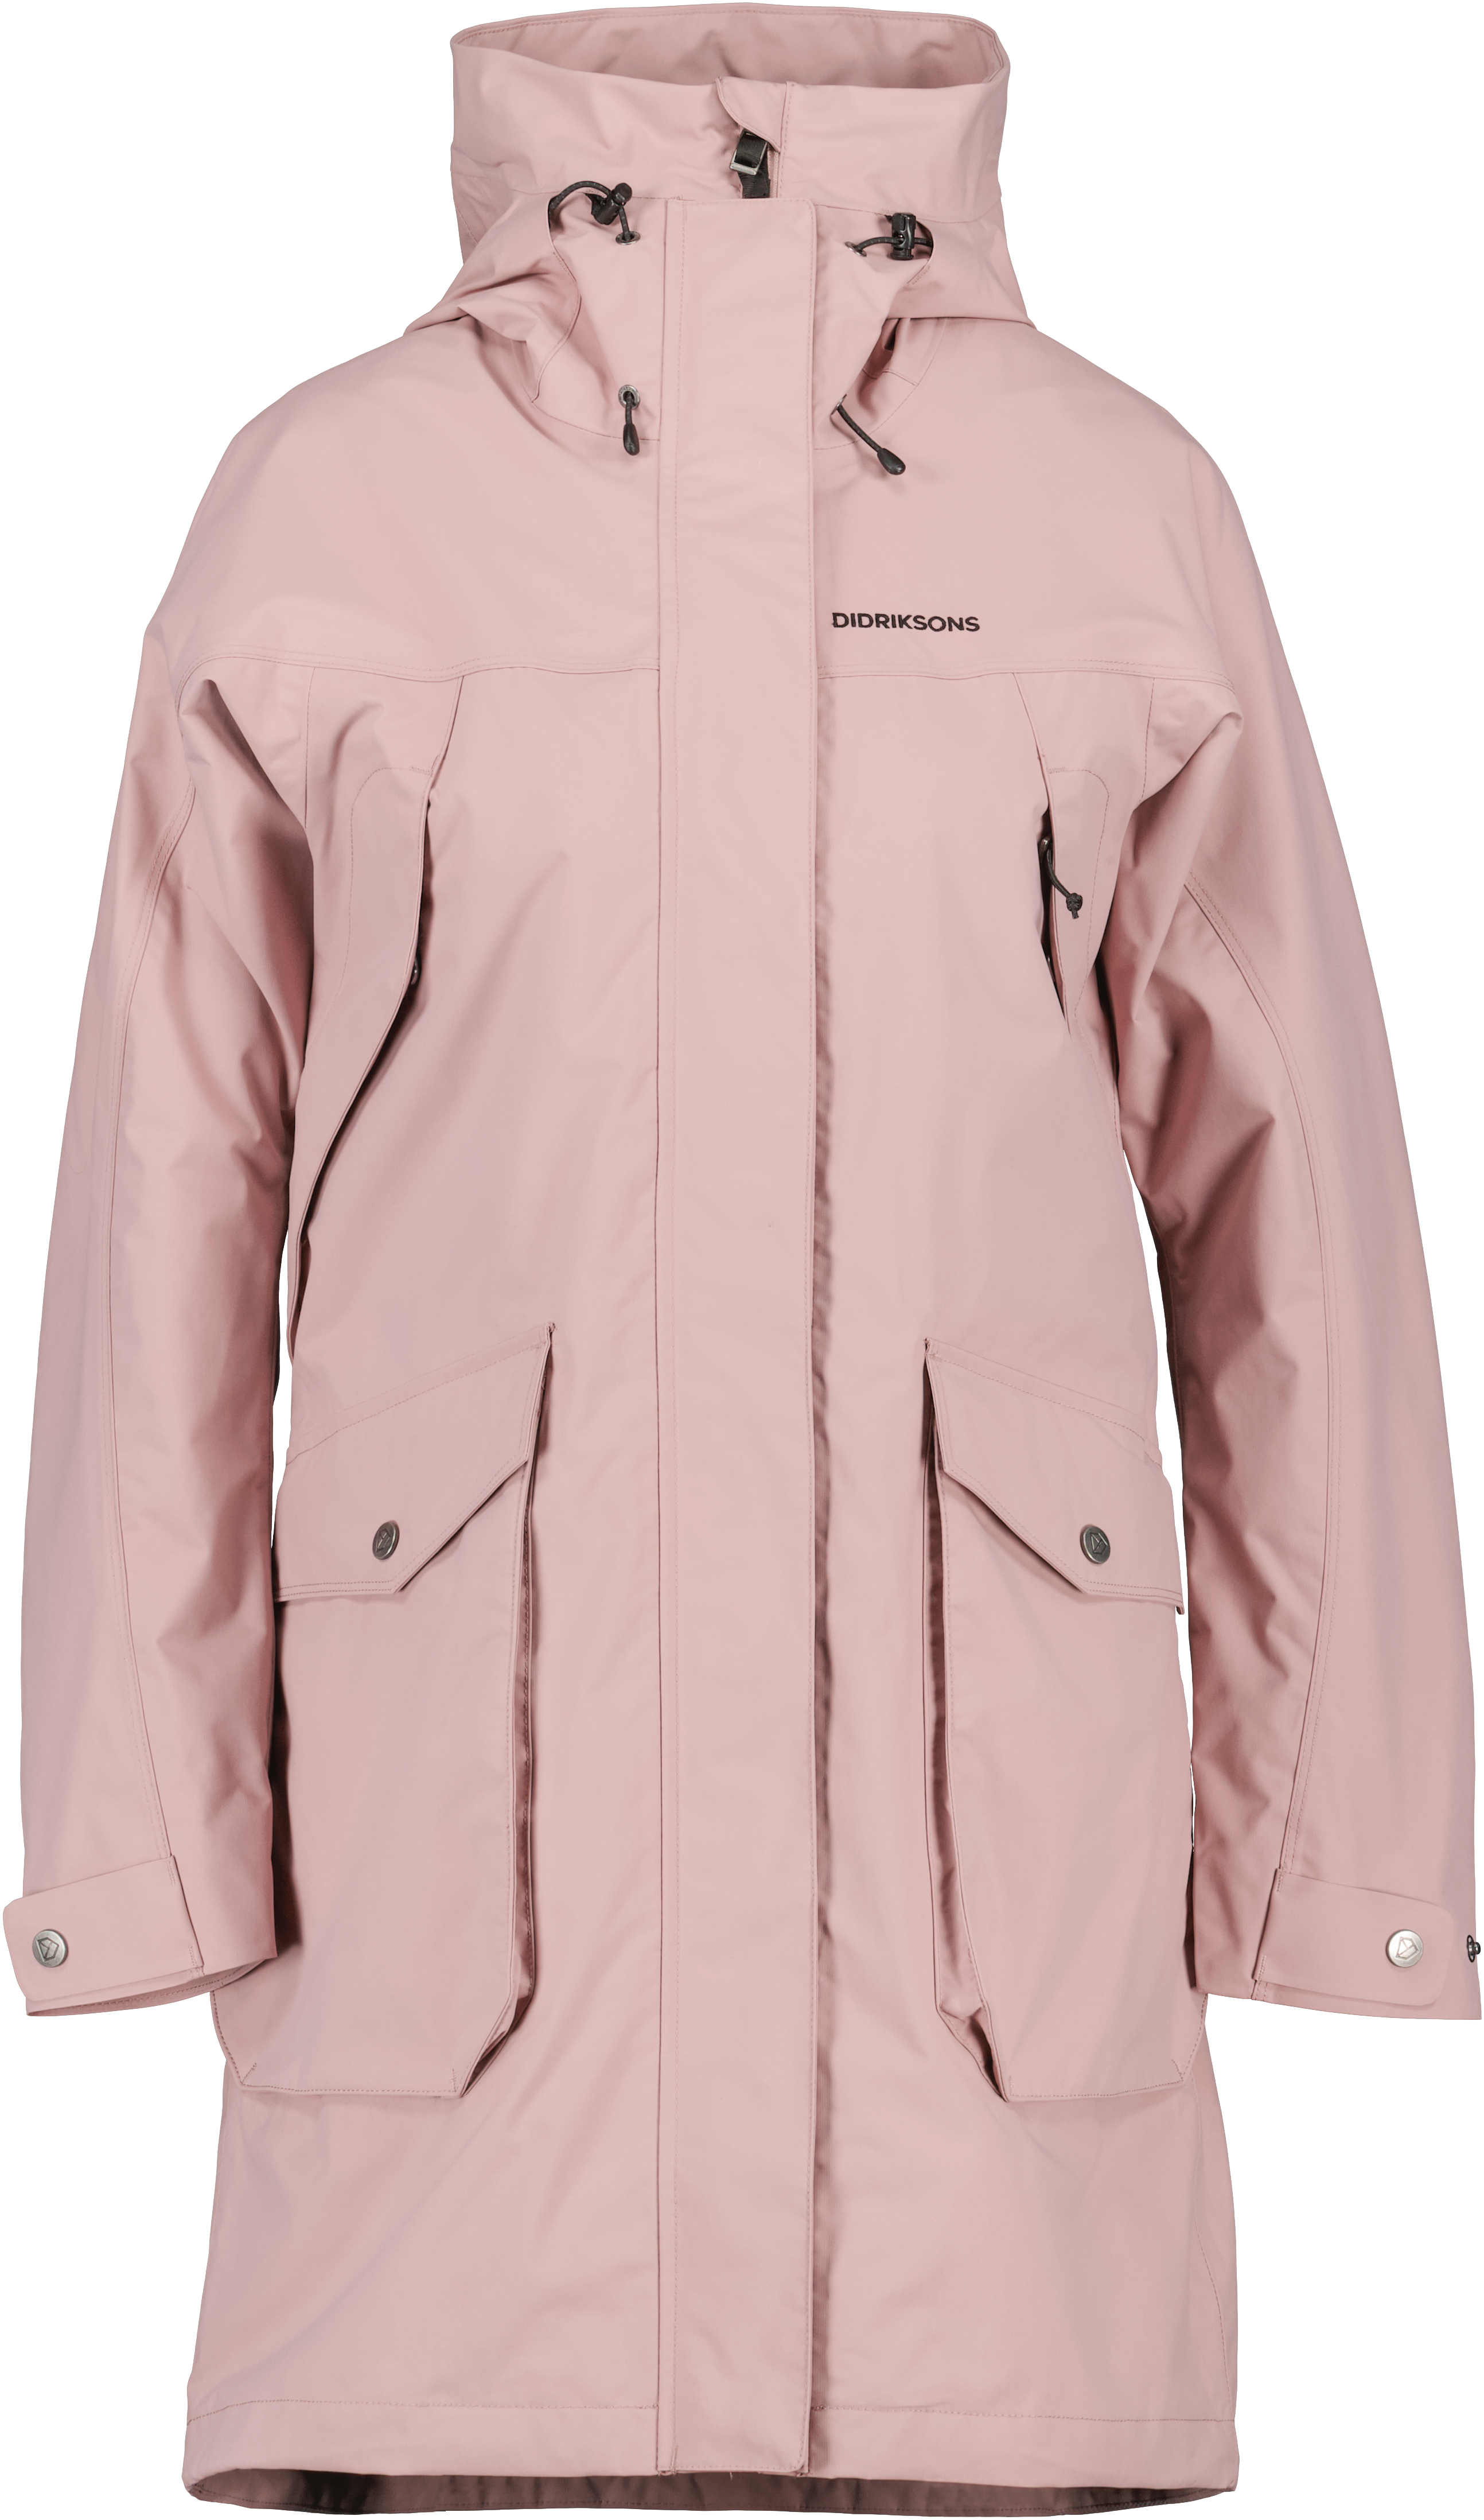 Didriksons Women’s Thelma Parka 10 Oyster Lilac